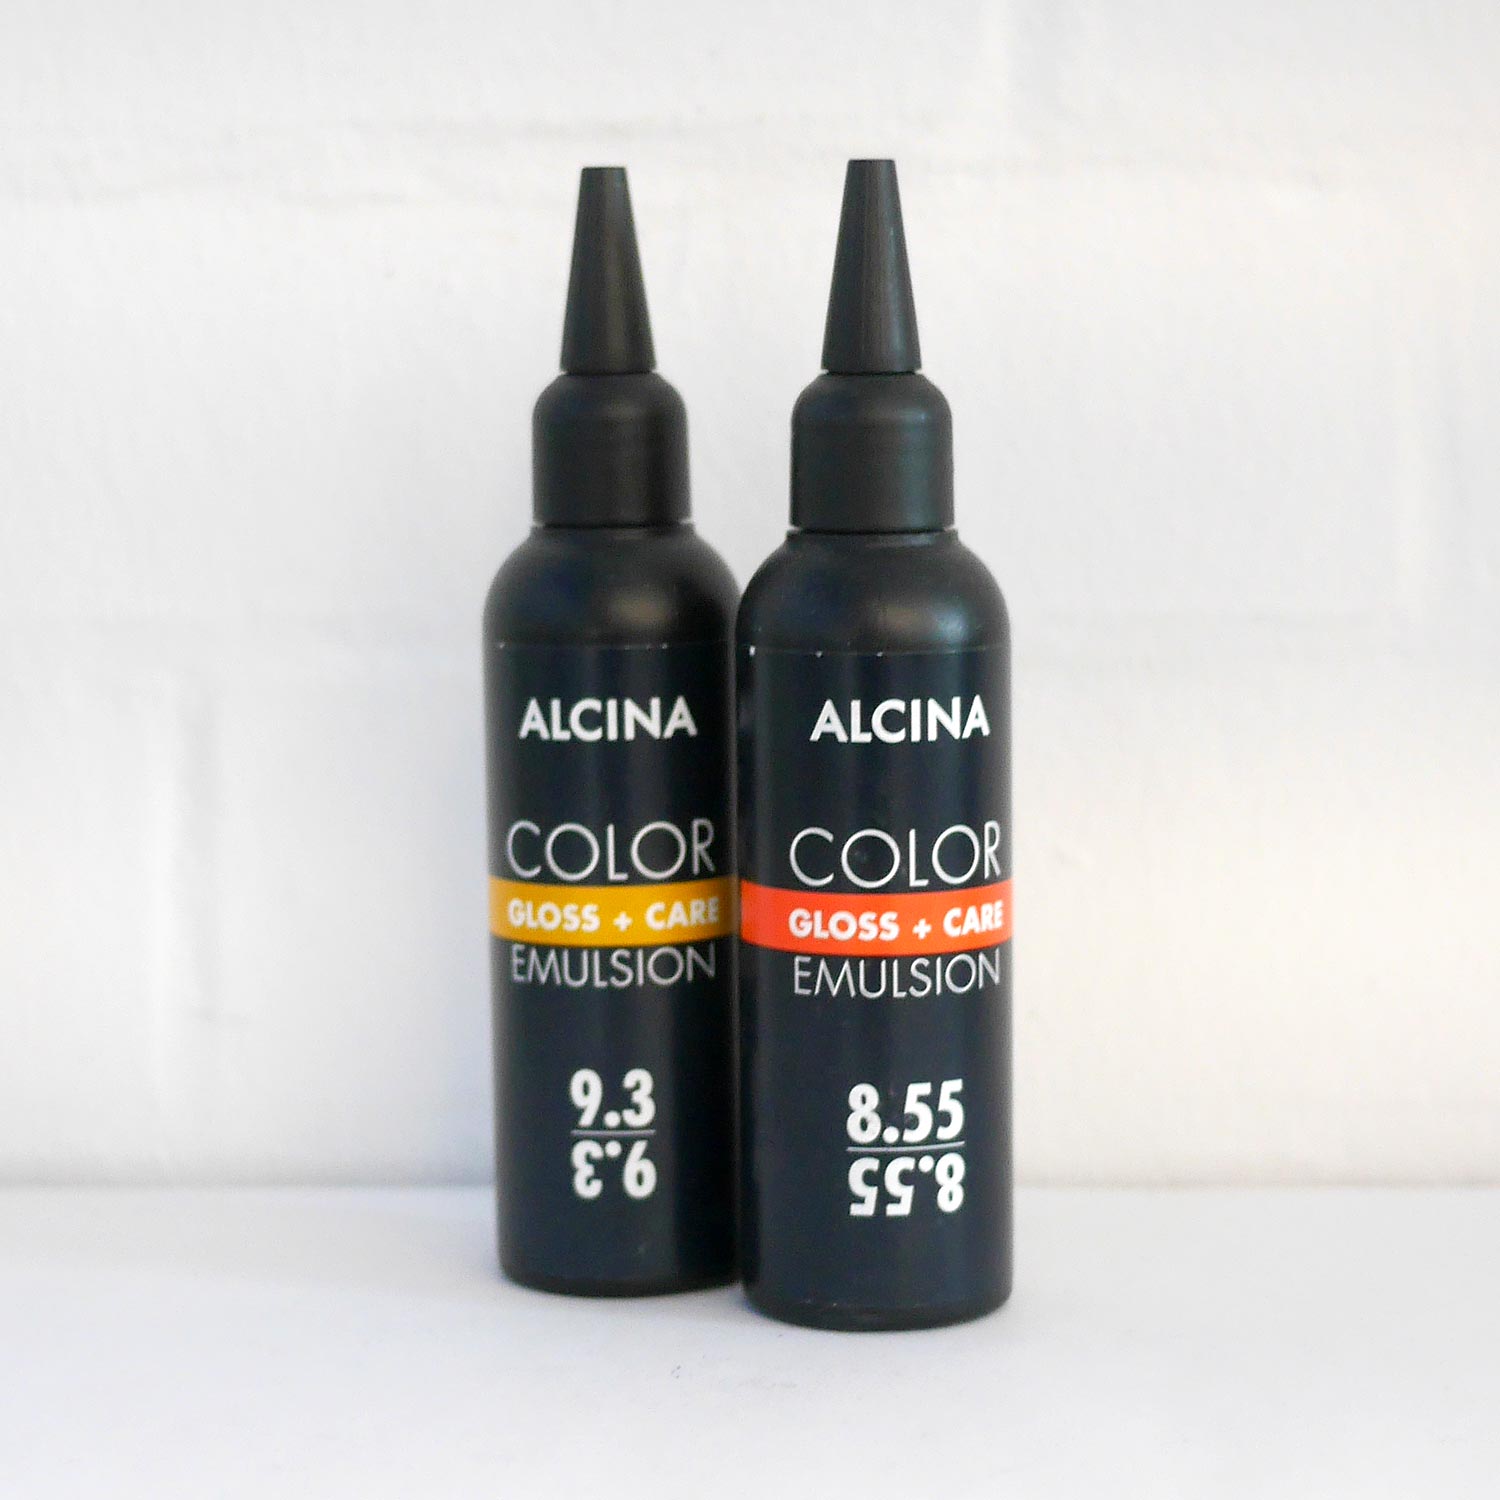 ALCINA Color Emulsion Gloss + Care - 7.3 Mittelblond Gold 100ml